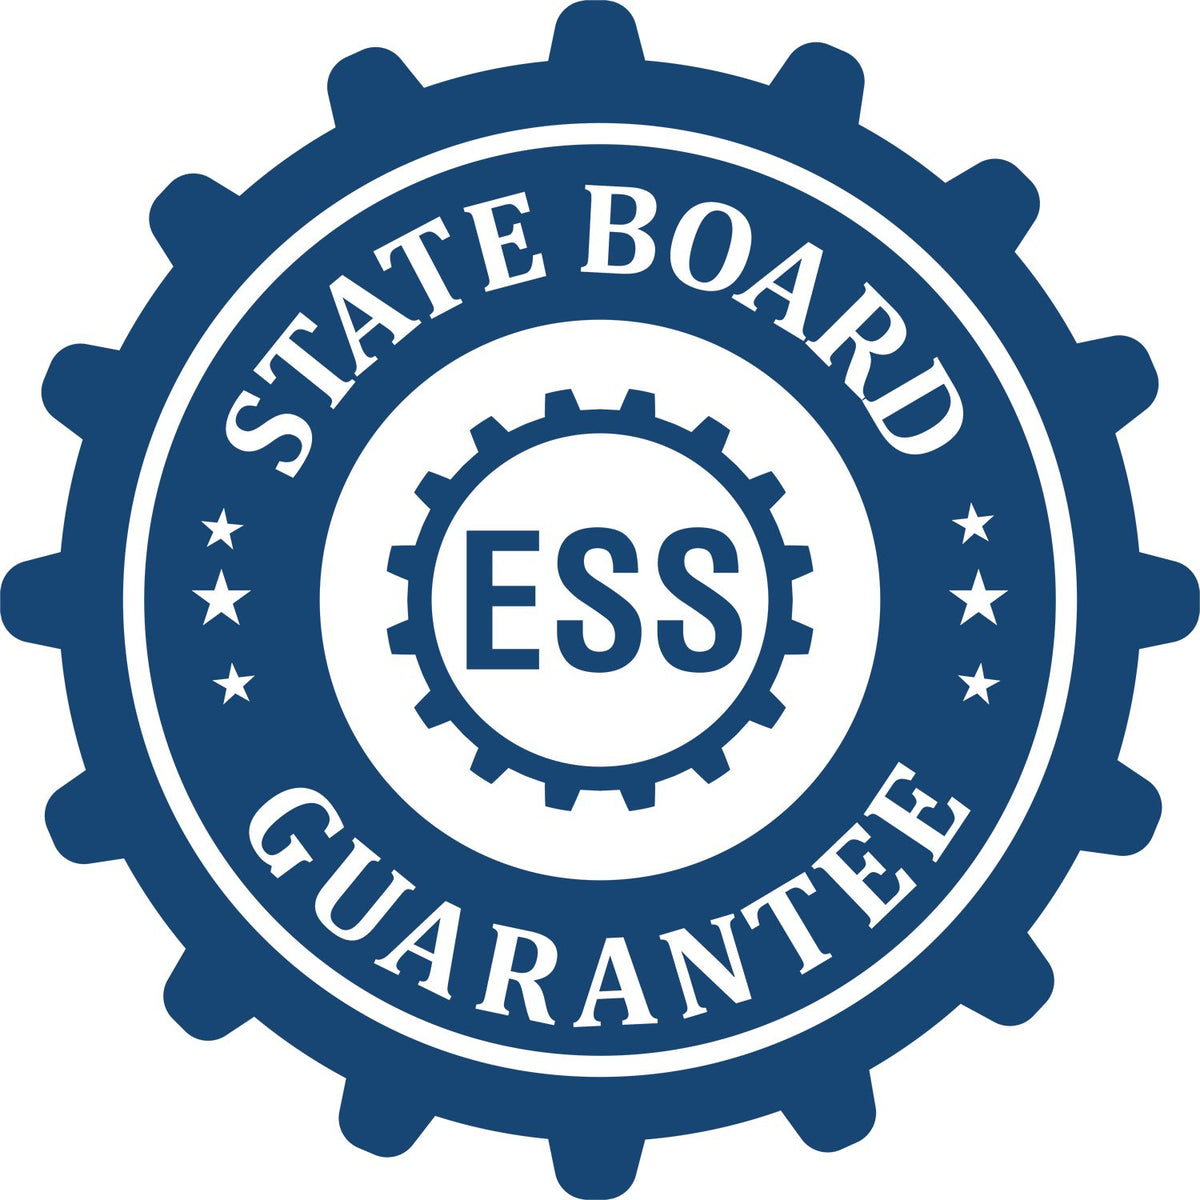 An emblem in a gear shape illustrating a state board guarantee for the Premium MaxLight Pre-Inked Tennessee Landscape Architectural Stamp product.